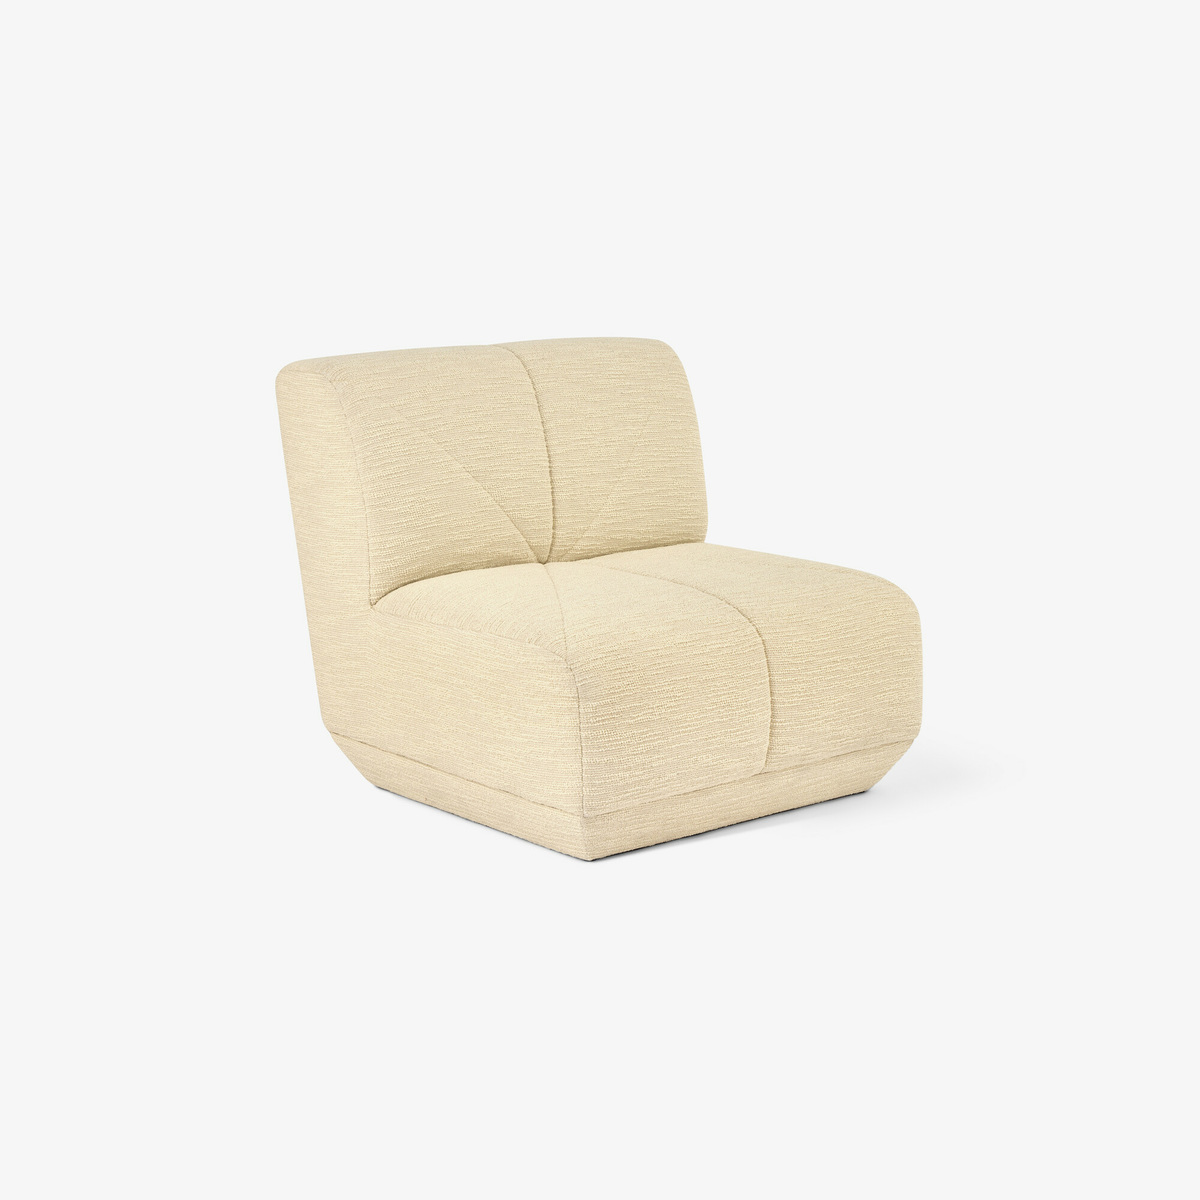 Chill Armchair, Off-White - Curl fabric - image 2